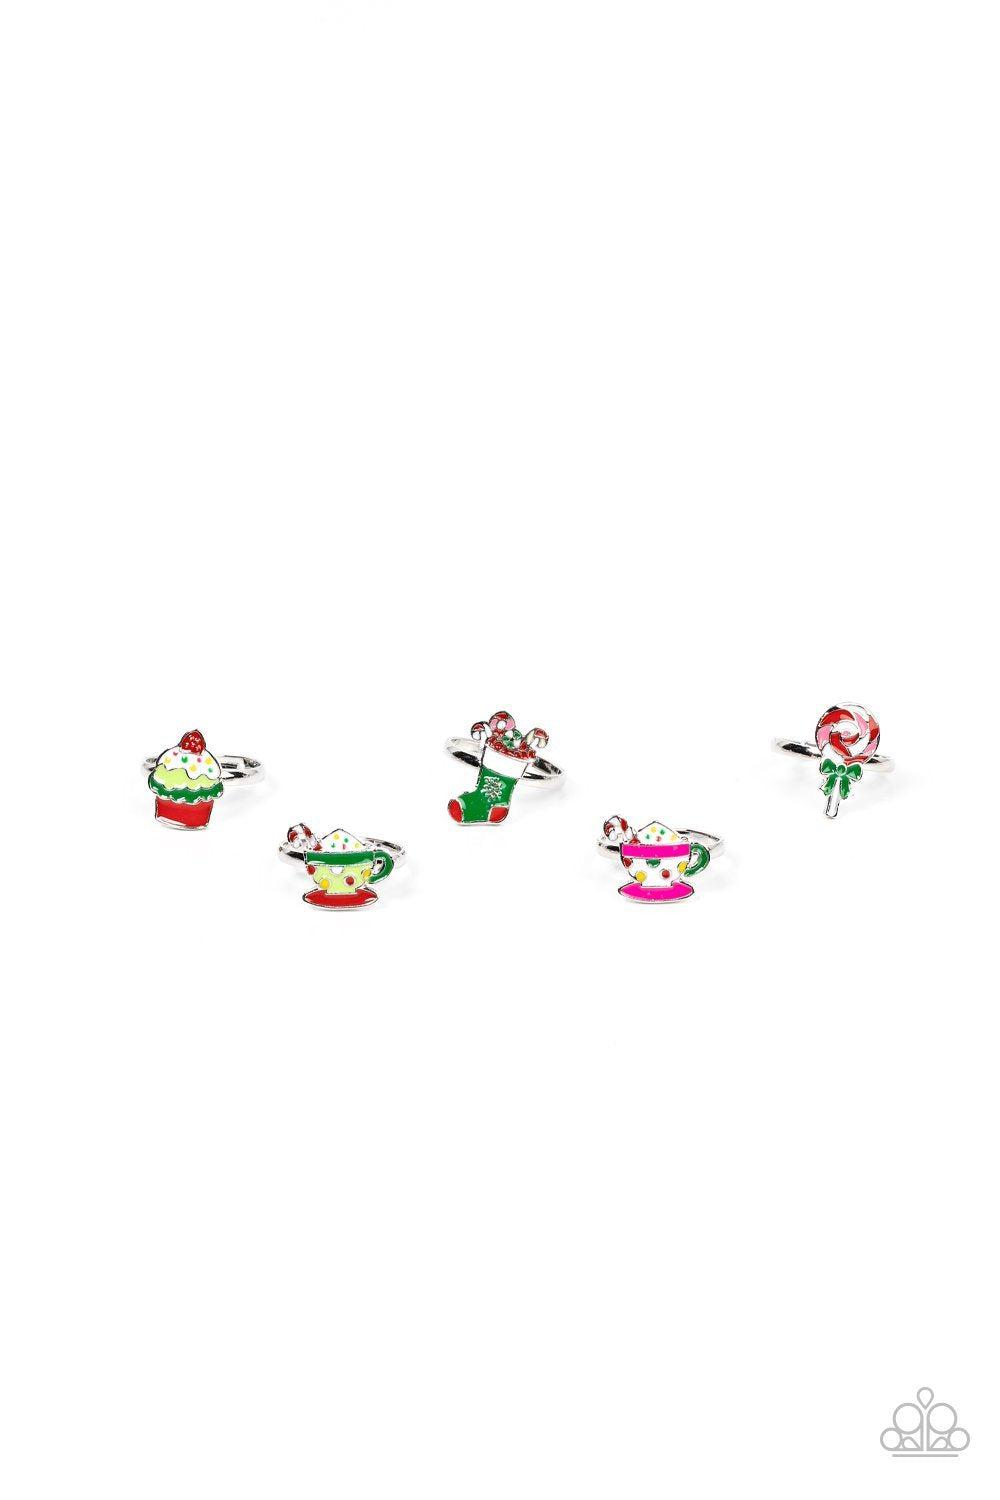 Starlet Shimmer Children's Christmas Holiday Themed Rings 2021 - Paparazzi Accessories (set of 5) - Full set -CarasShop.com - $5 Jewelry by Cara Jewels